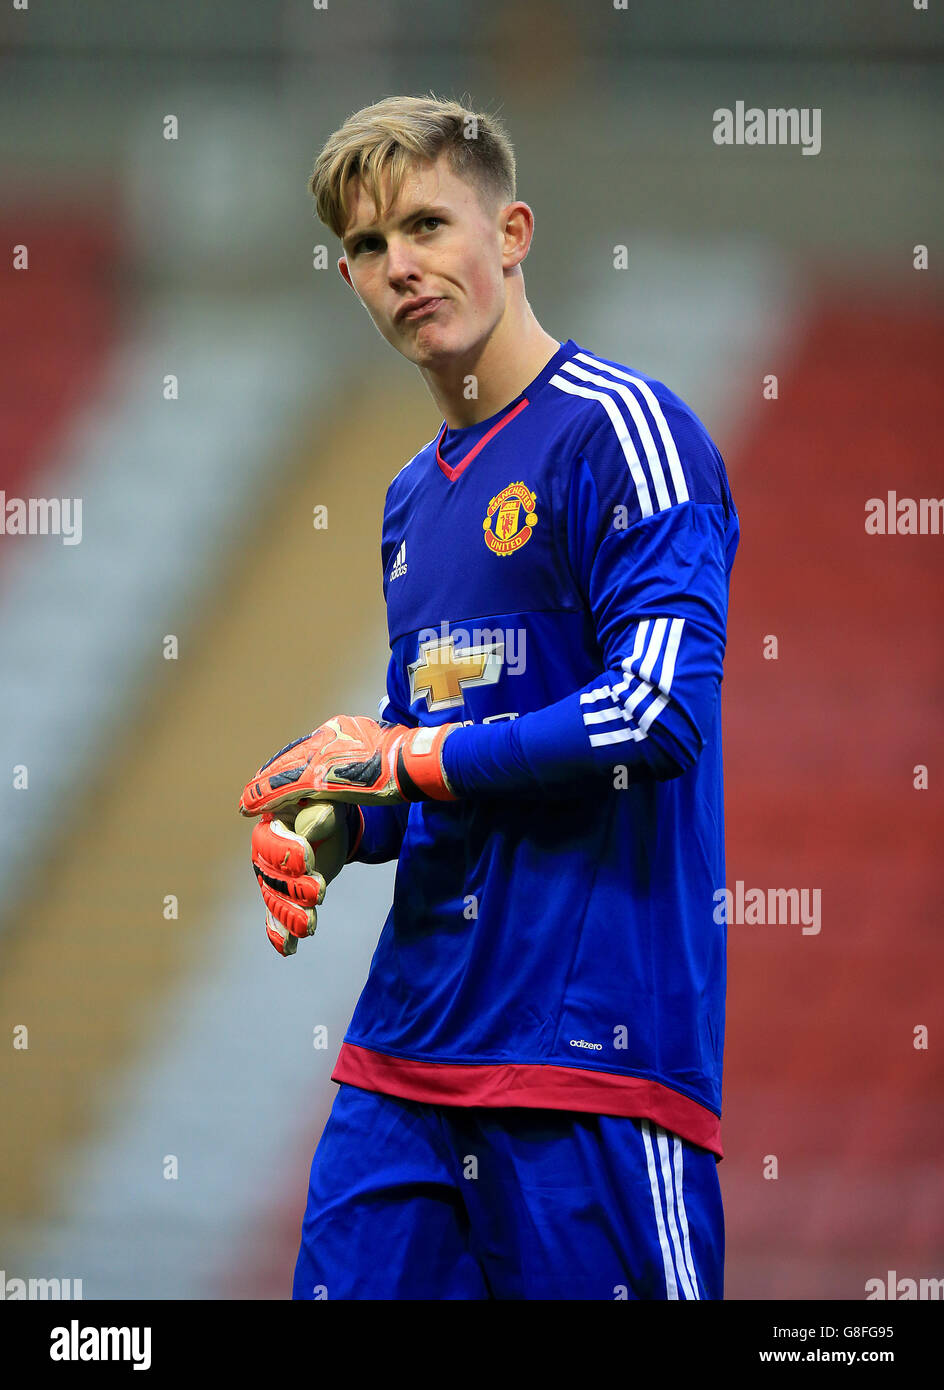 Soccer - UEFA Youth League - Group A - Manchester United v CSKA Moscow - Leigh Sports Village. Dean Henderson, Manchester United goalkeeper Stock Photo